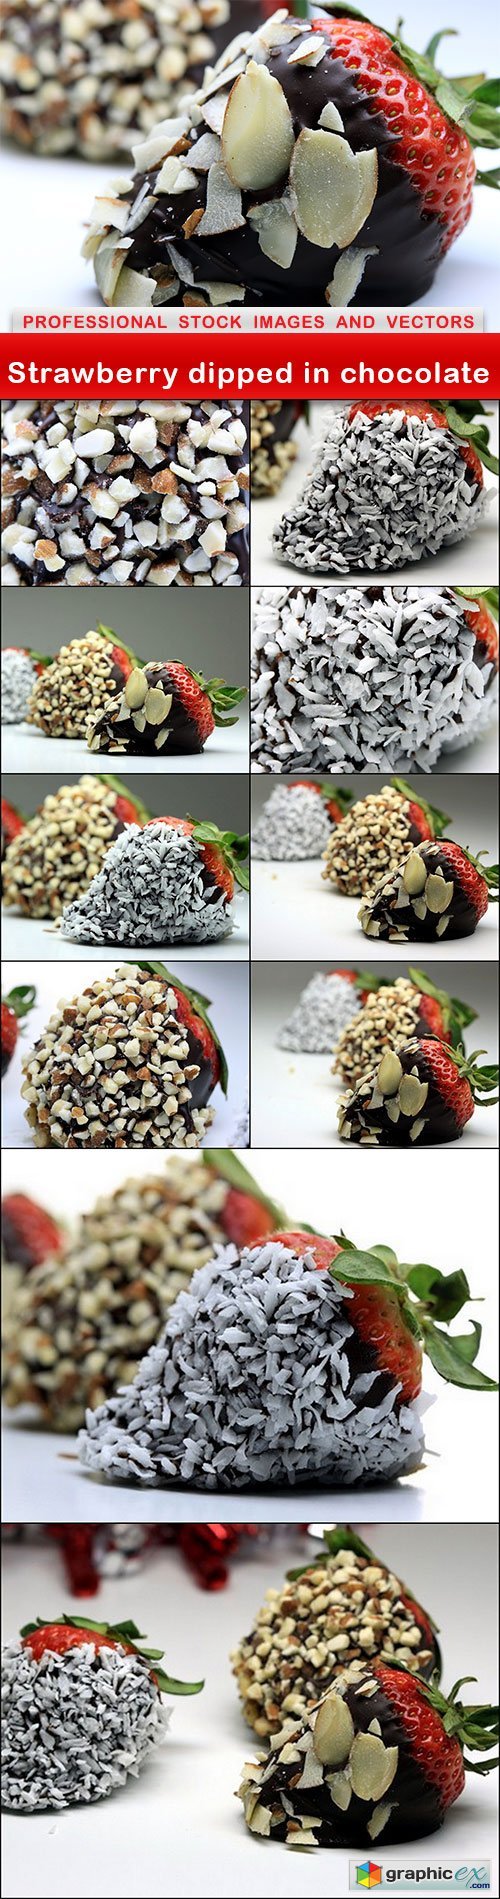 Strawberry dipped in chocolate - 11 UHQ JPEG